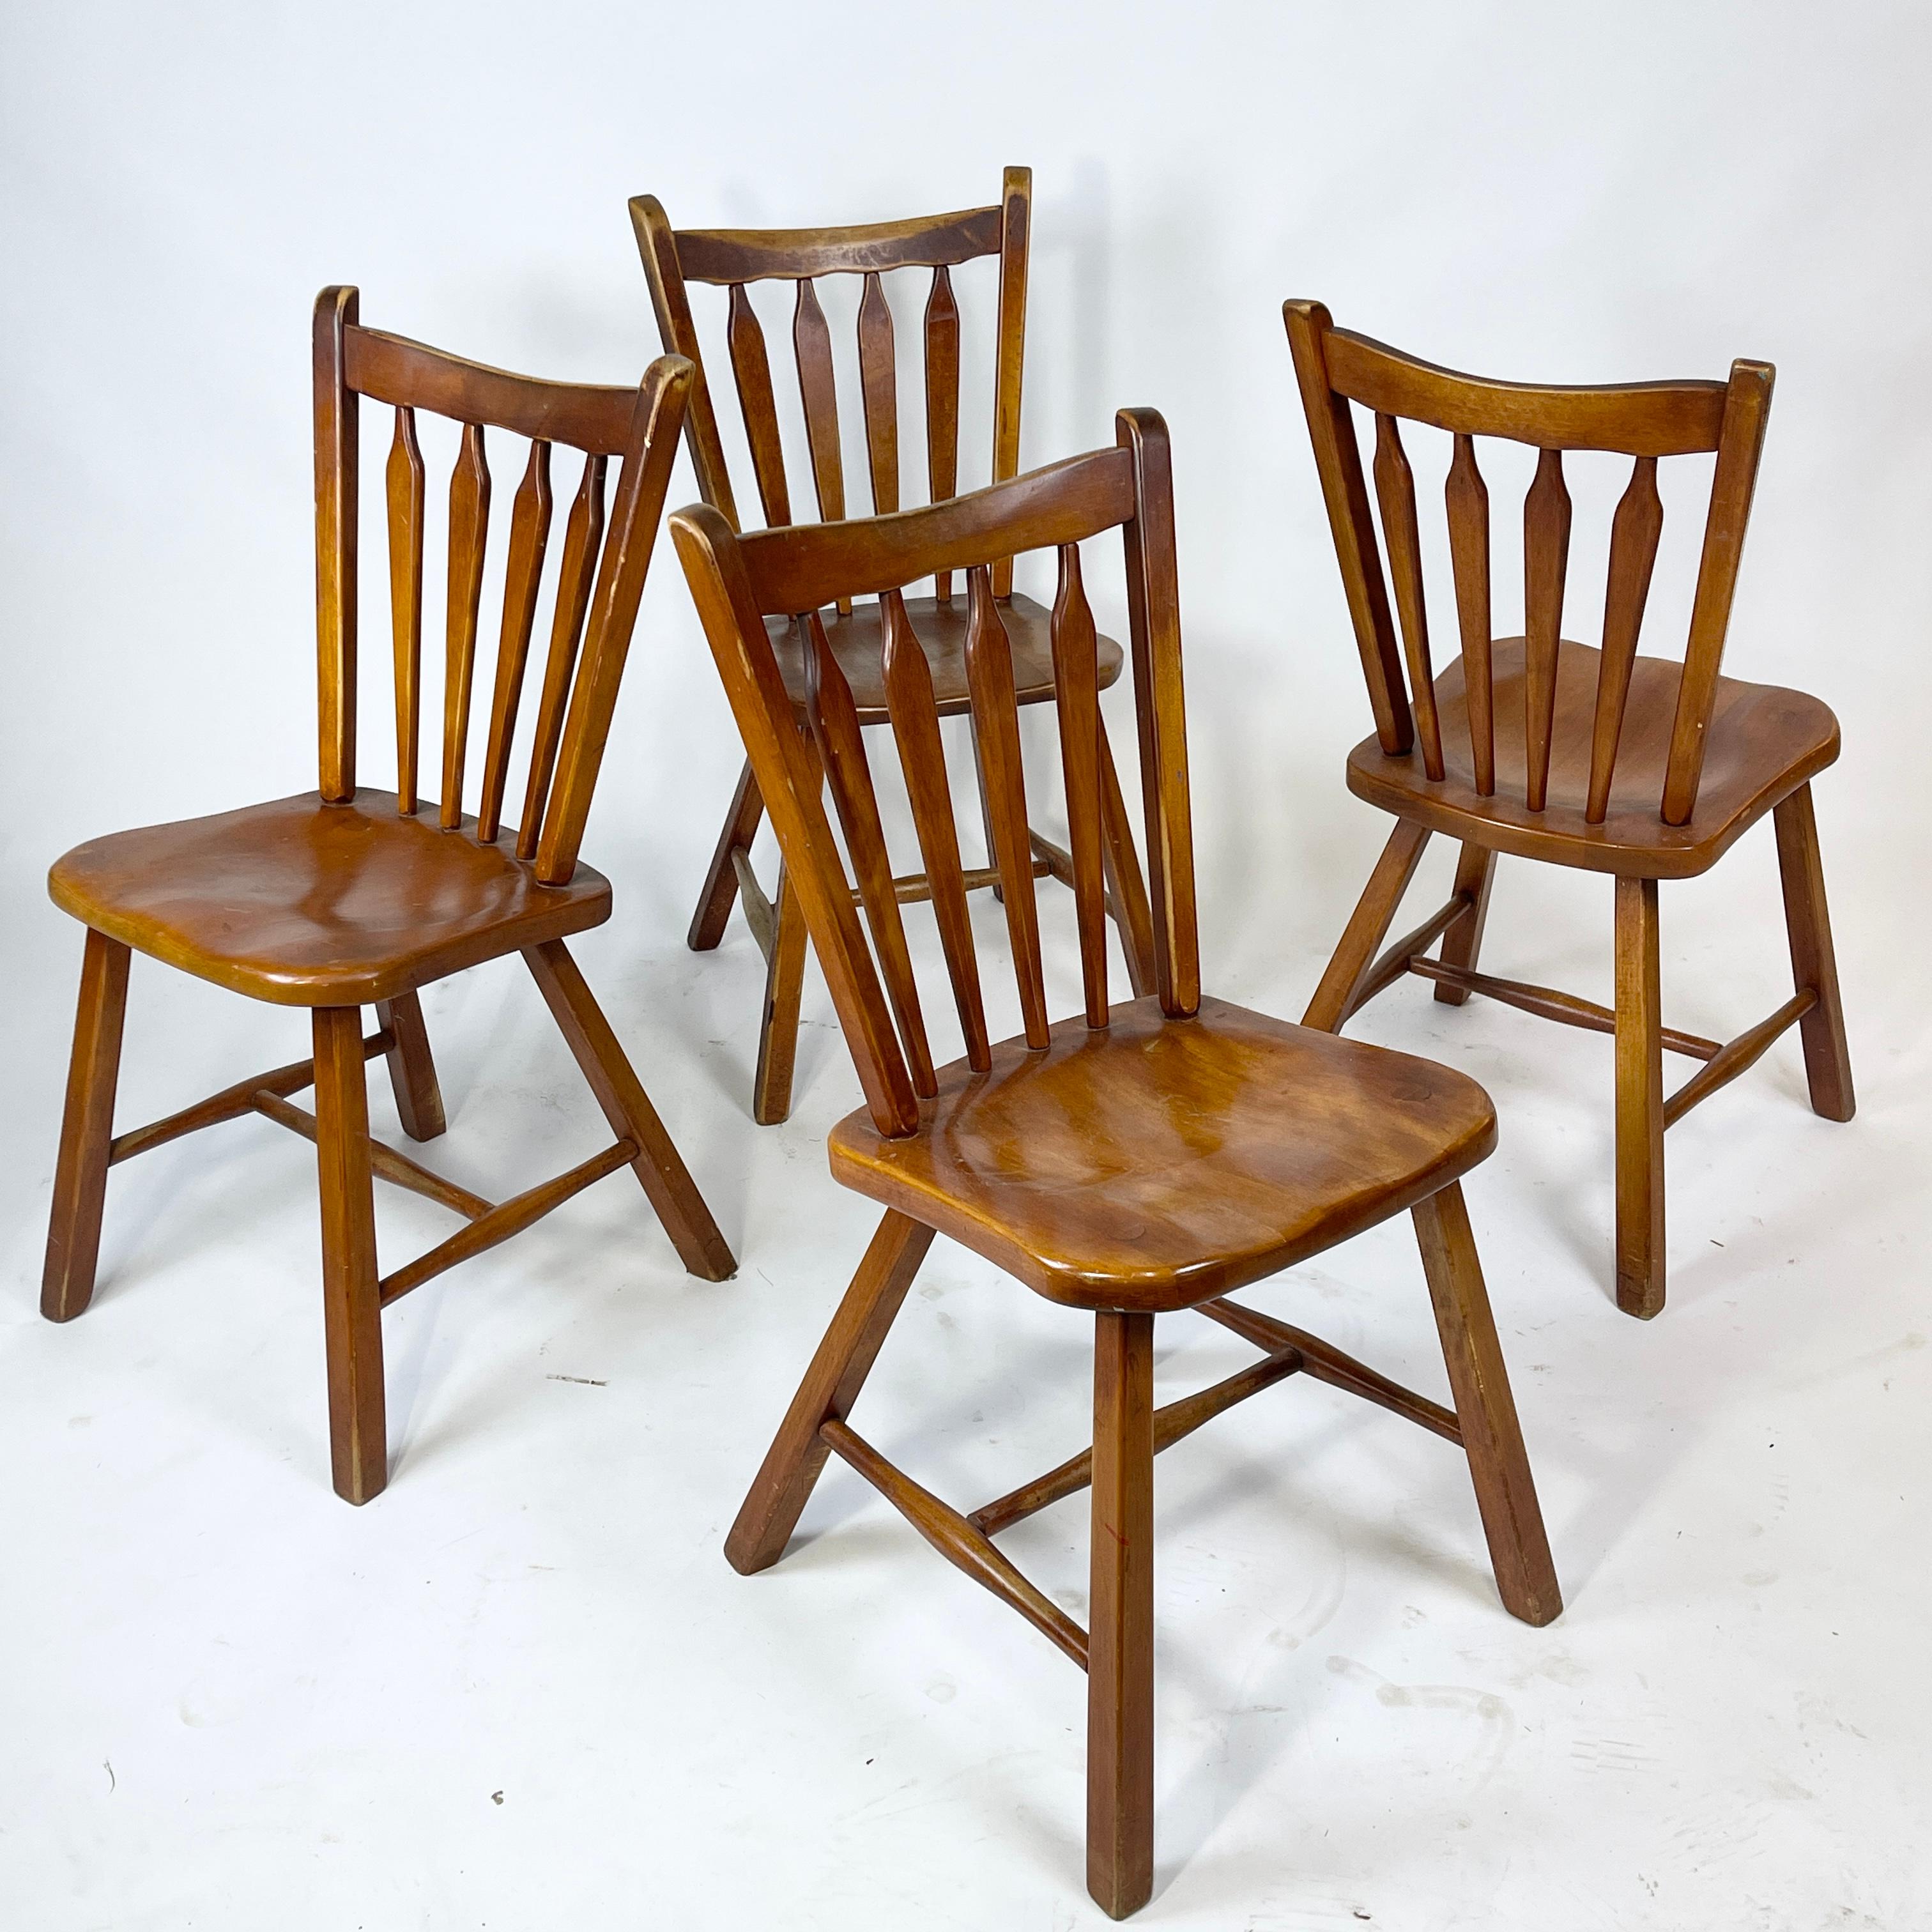 Great piece of Americana with a modern twist. Stunning, sleek, yet sturdy. Perfect chairs for the country house. Set of four chairs with lovely patina. Chair seats are shown. One more worn than the rest however all are very solid and nicely